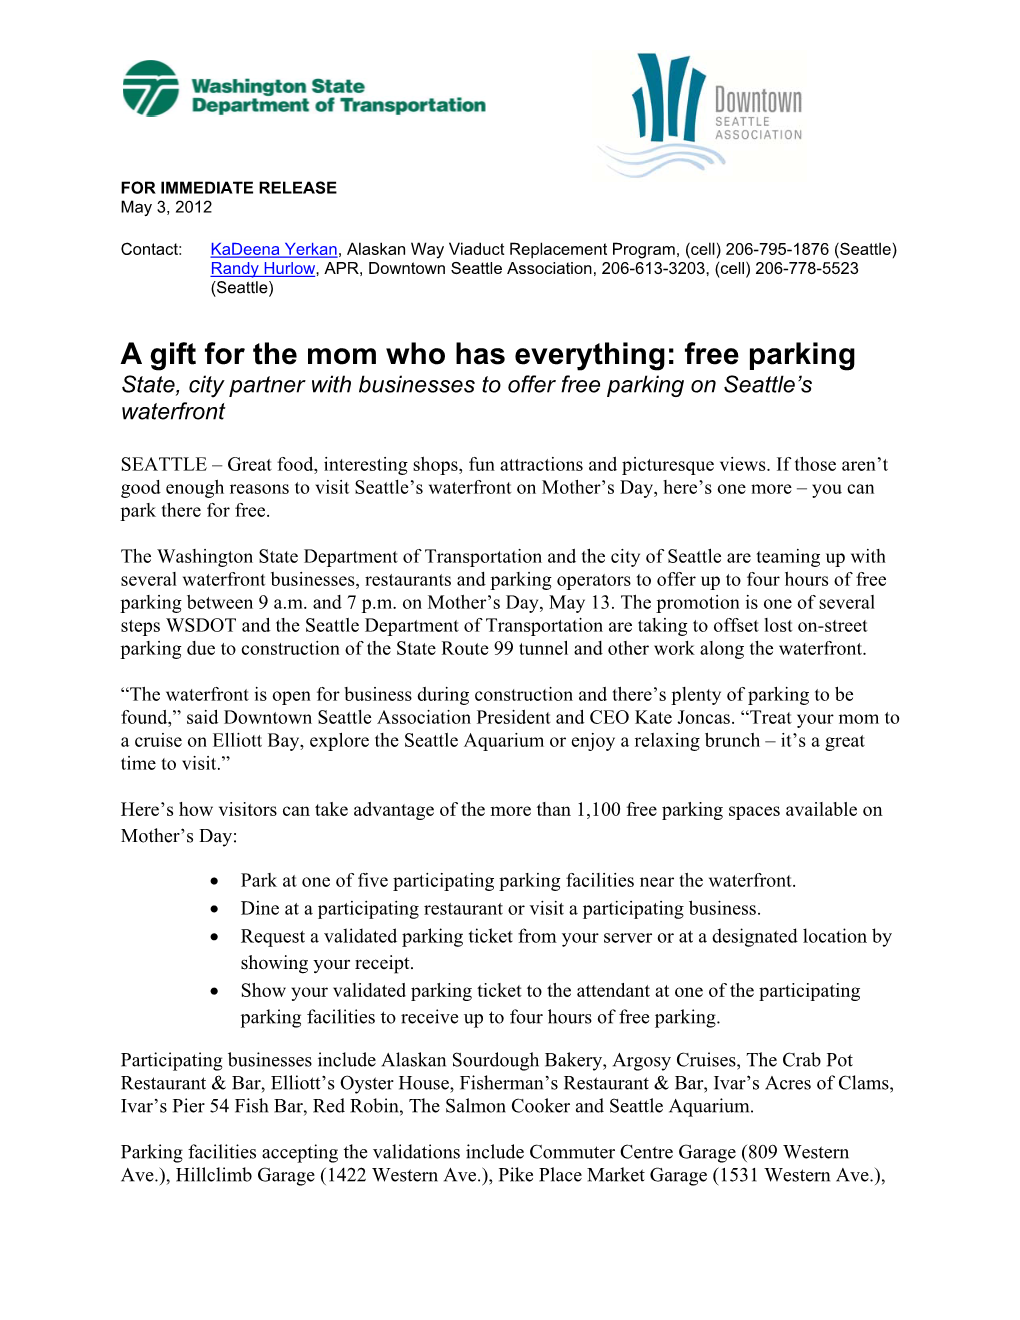 A Gift for the Mom Who Has Everything: Free Parking State, City Partner with Businesses to Offer Free Parking on Seattle’S Waterfront